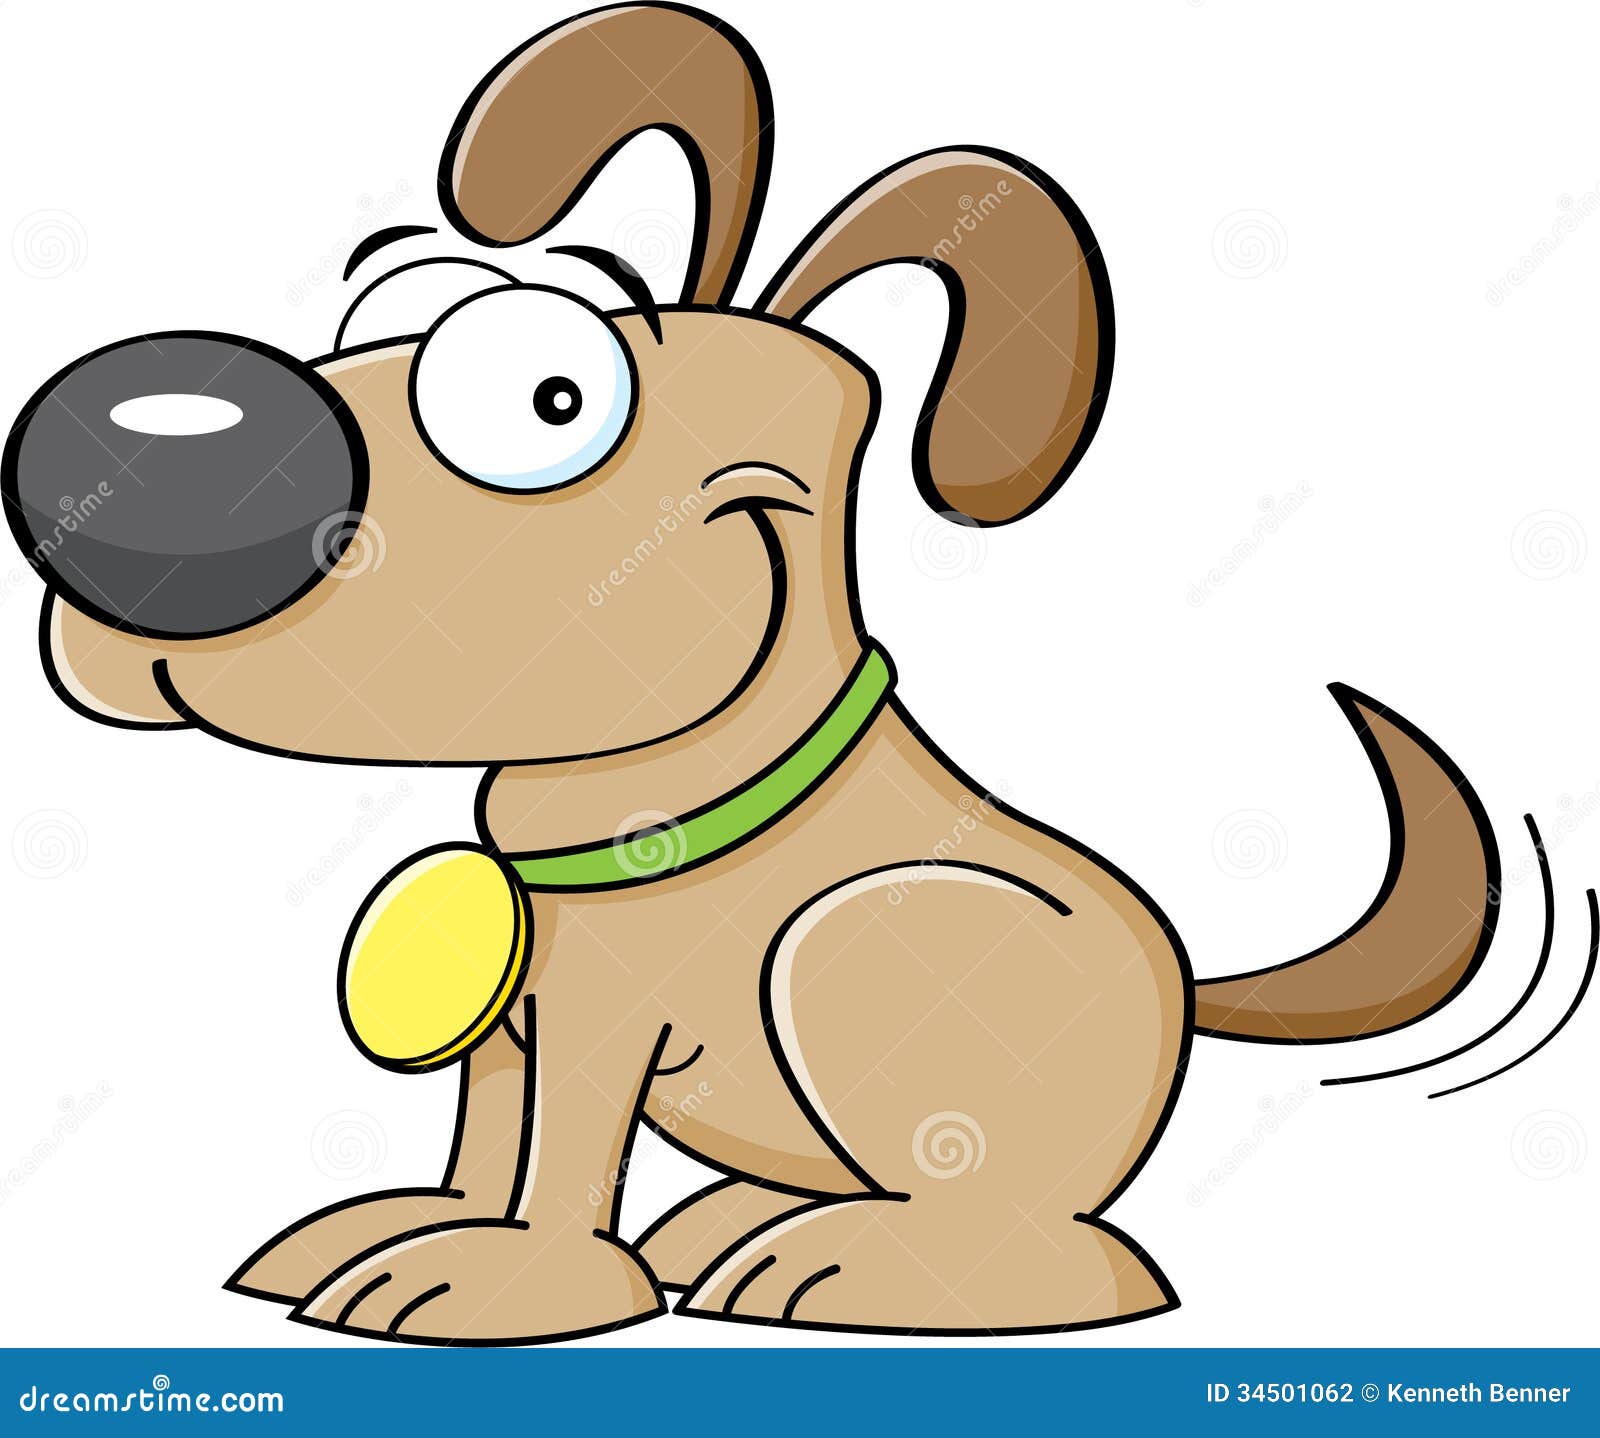 animated clipart dog wagging tail - photo #5